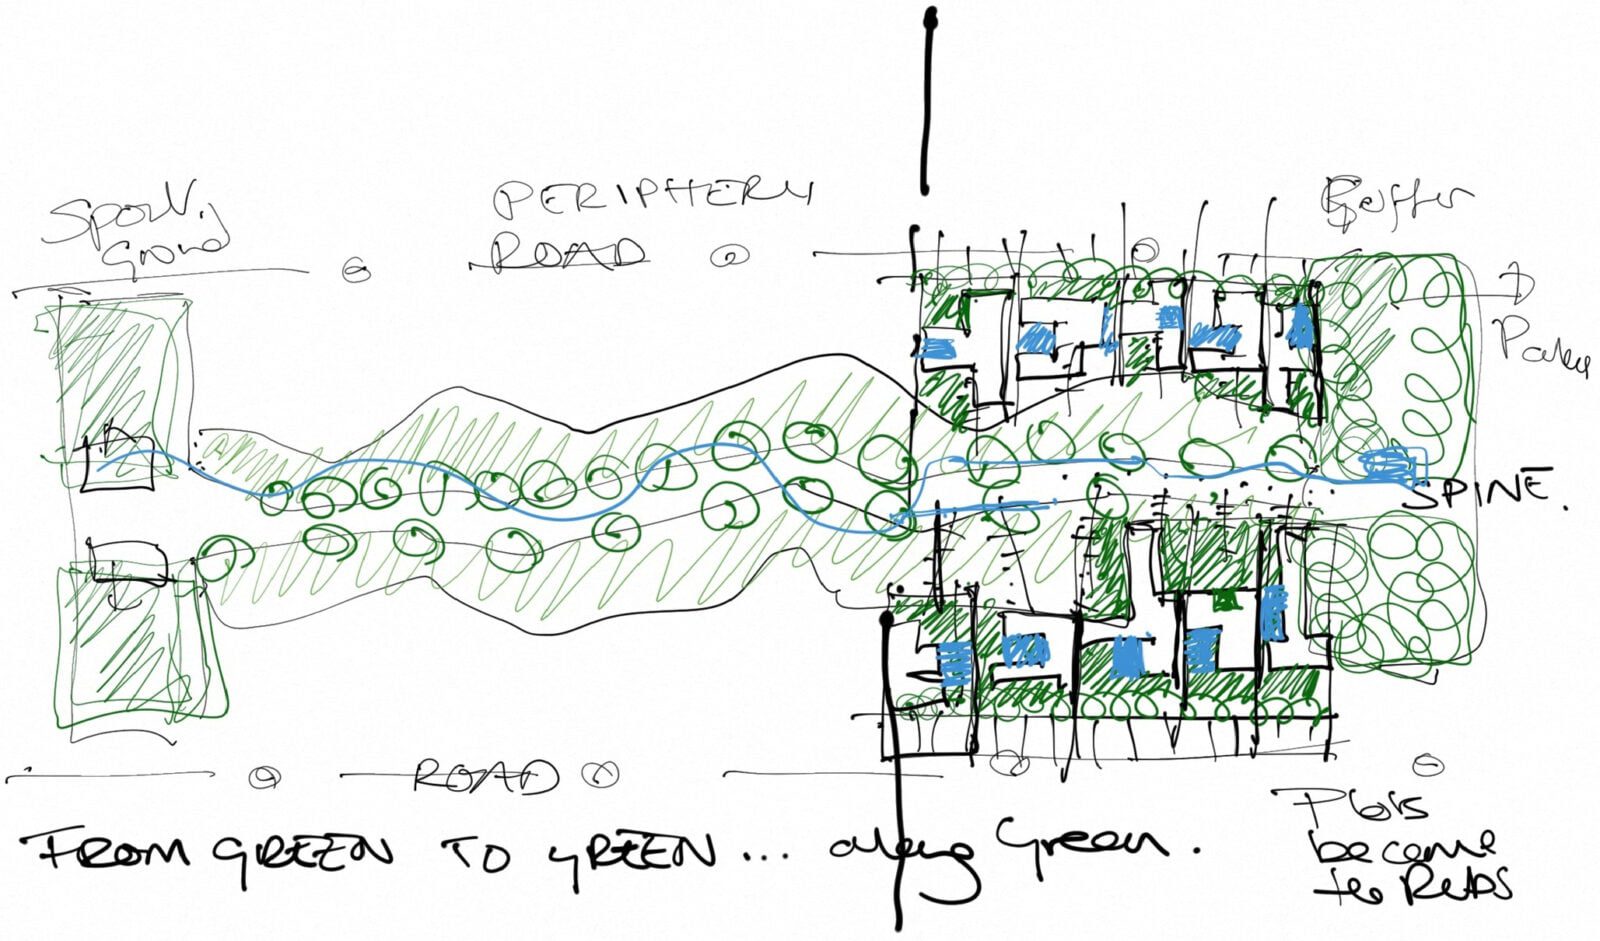 Concept diagram of the masterplan and green spine